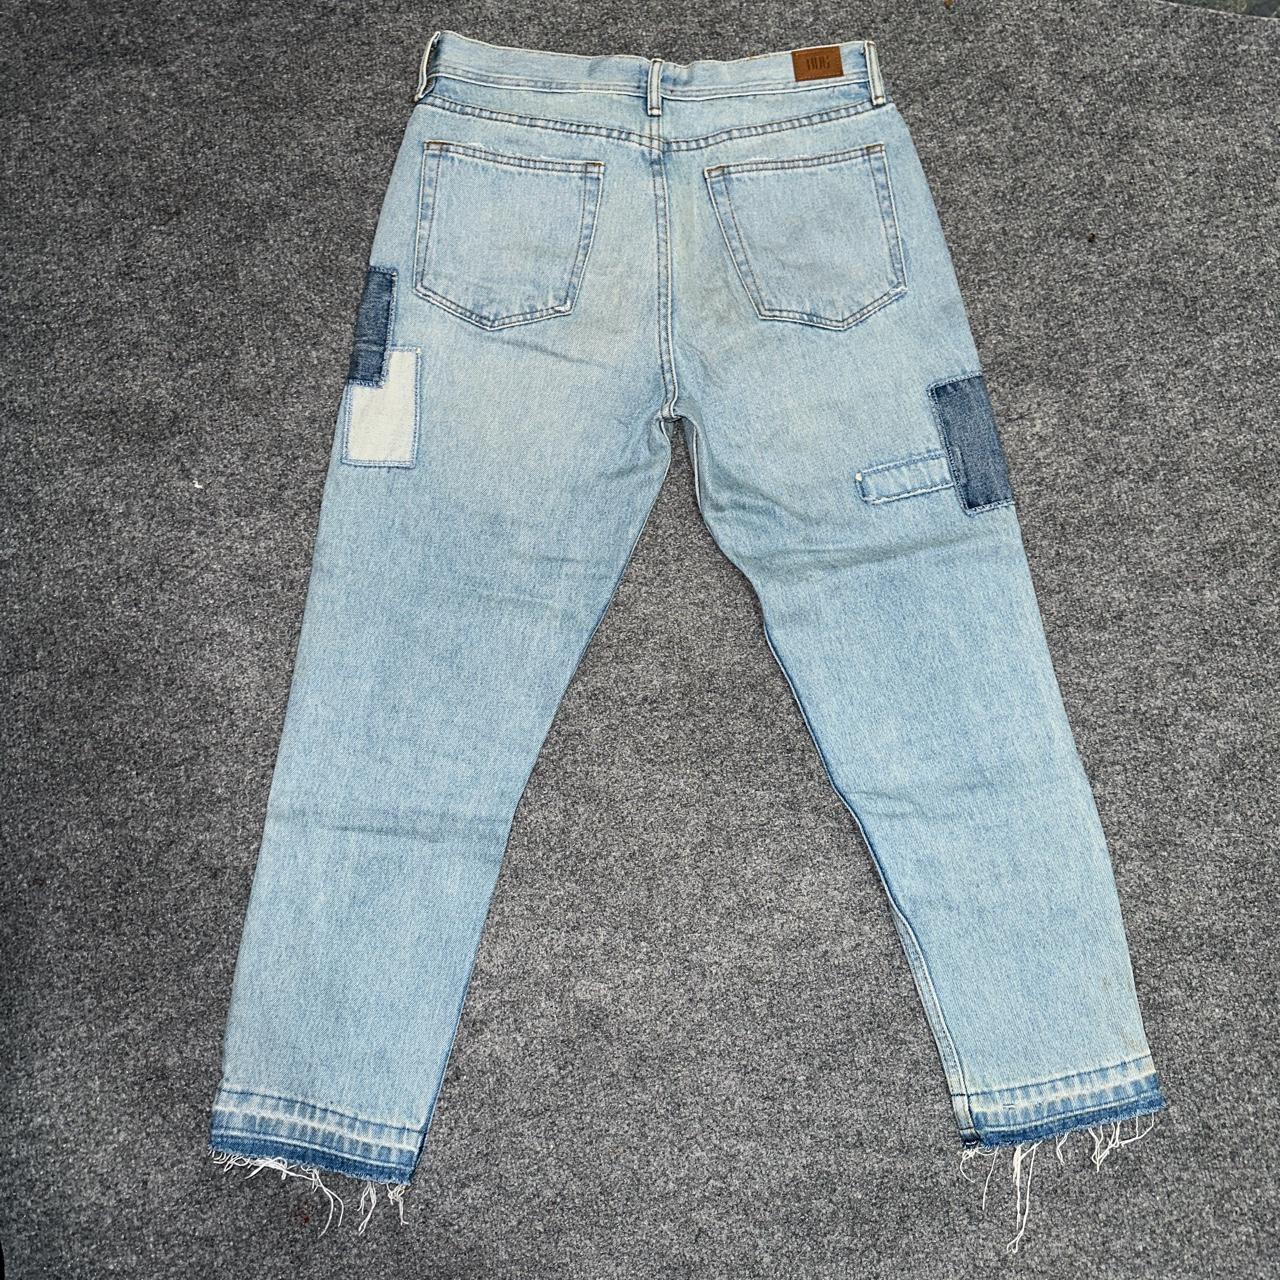 Urban Outfitters Men's Jeans (4)